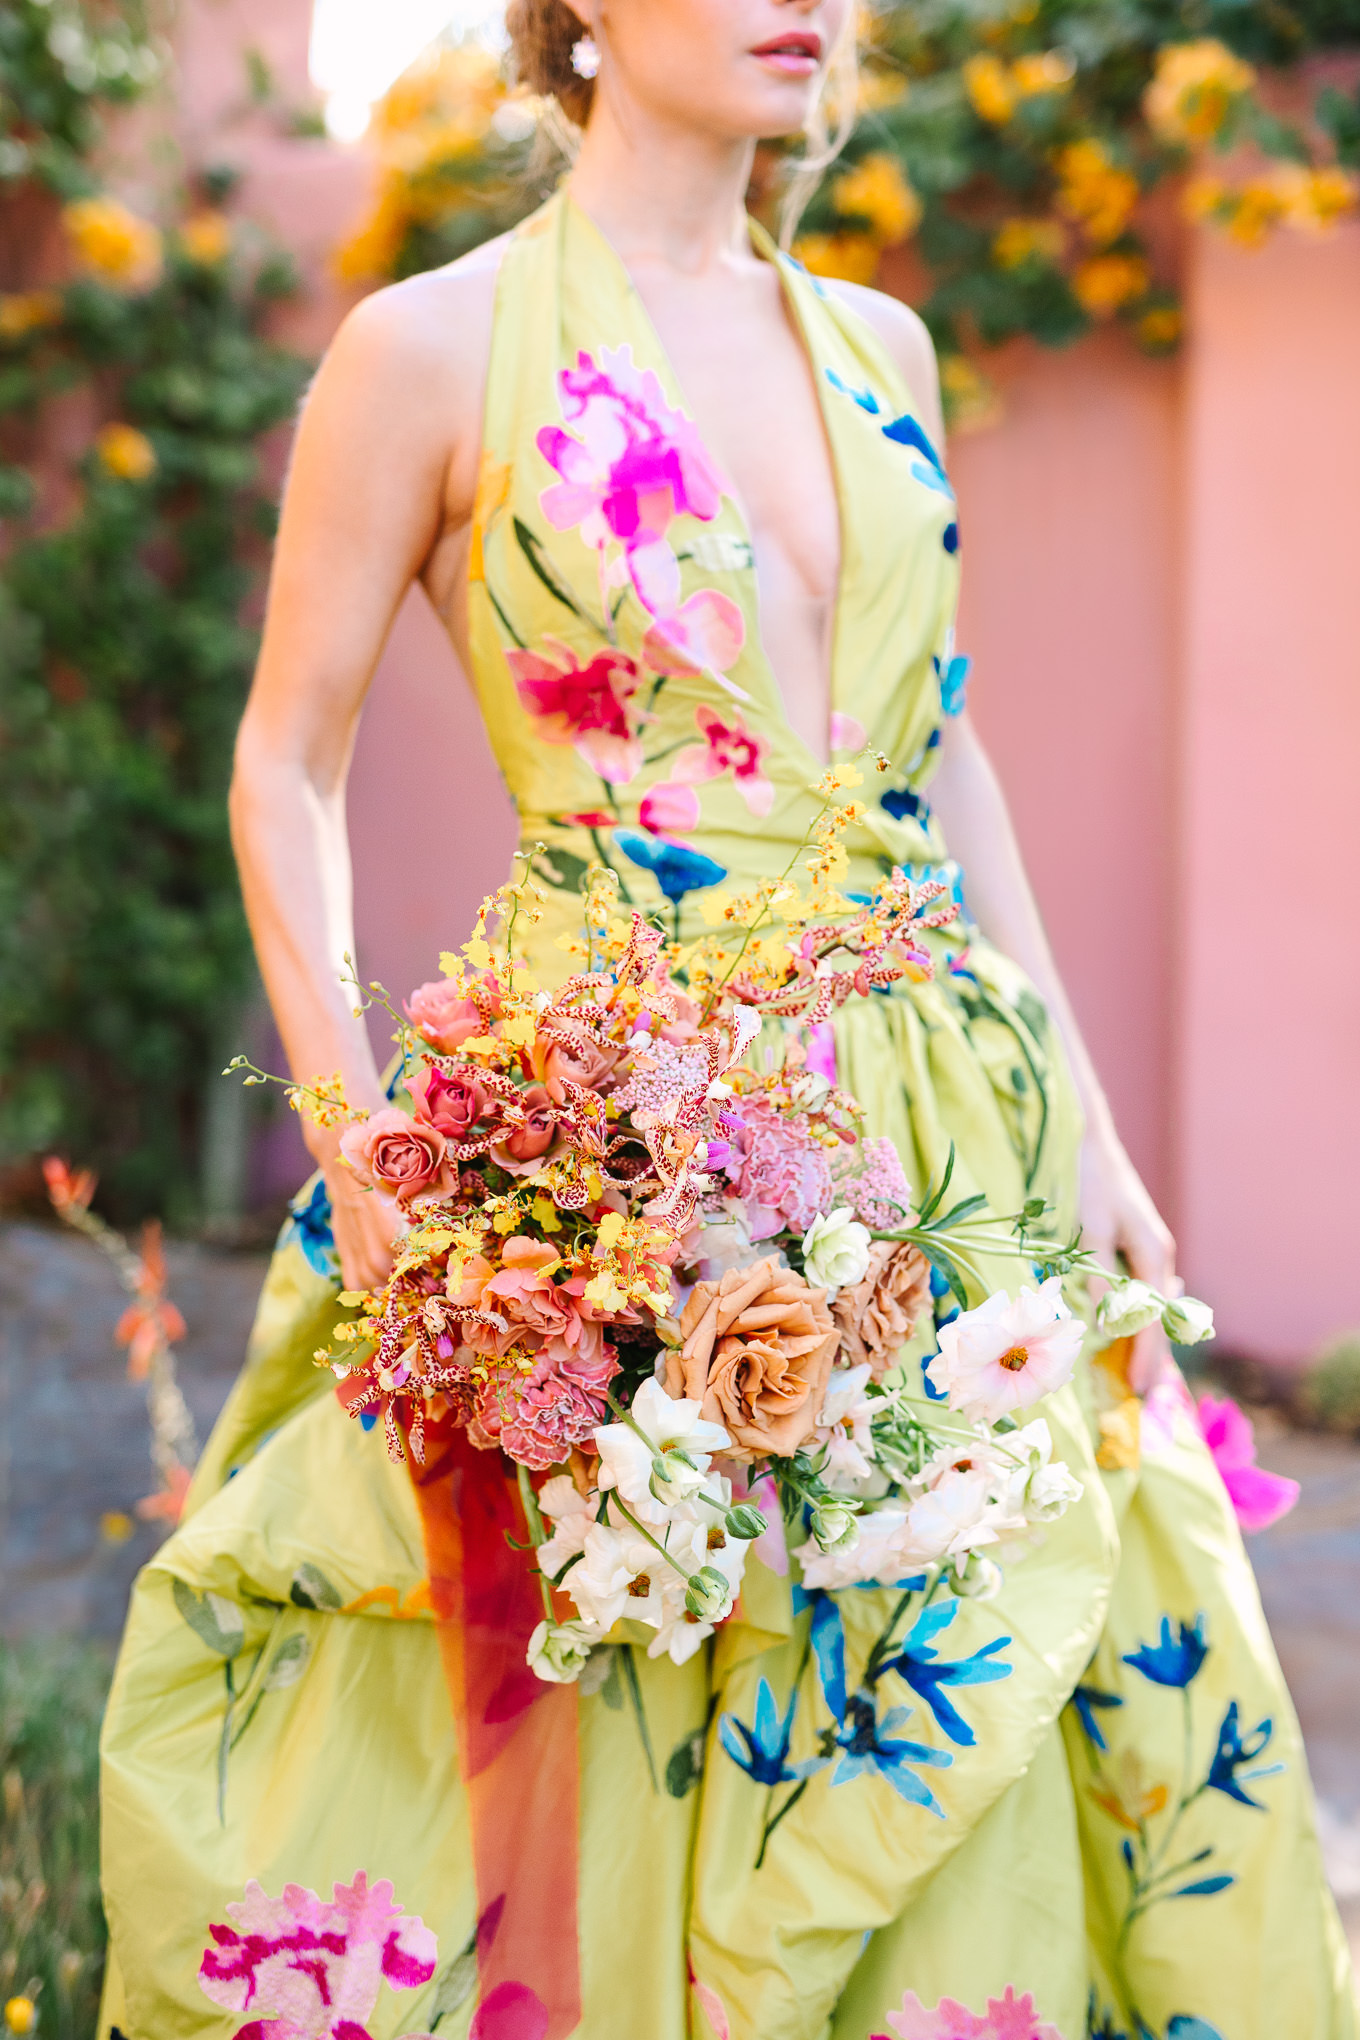 Chartreuse floral embroidered Marchesa gown at the Sands Hotel & Spa | Kindred Presets x Mary Costa Photography Sands Hotel Ad Campaign | Colorful Palm Springs wedding photography | #palmspringsphotographer #lightroompresets #sandshotel #pinkhotel #kindredpresets  Source: Mary Costa Photography | Los Angeles